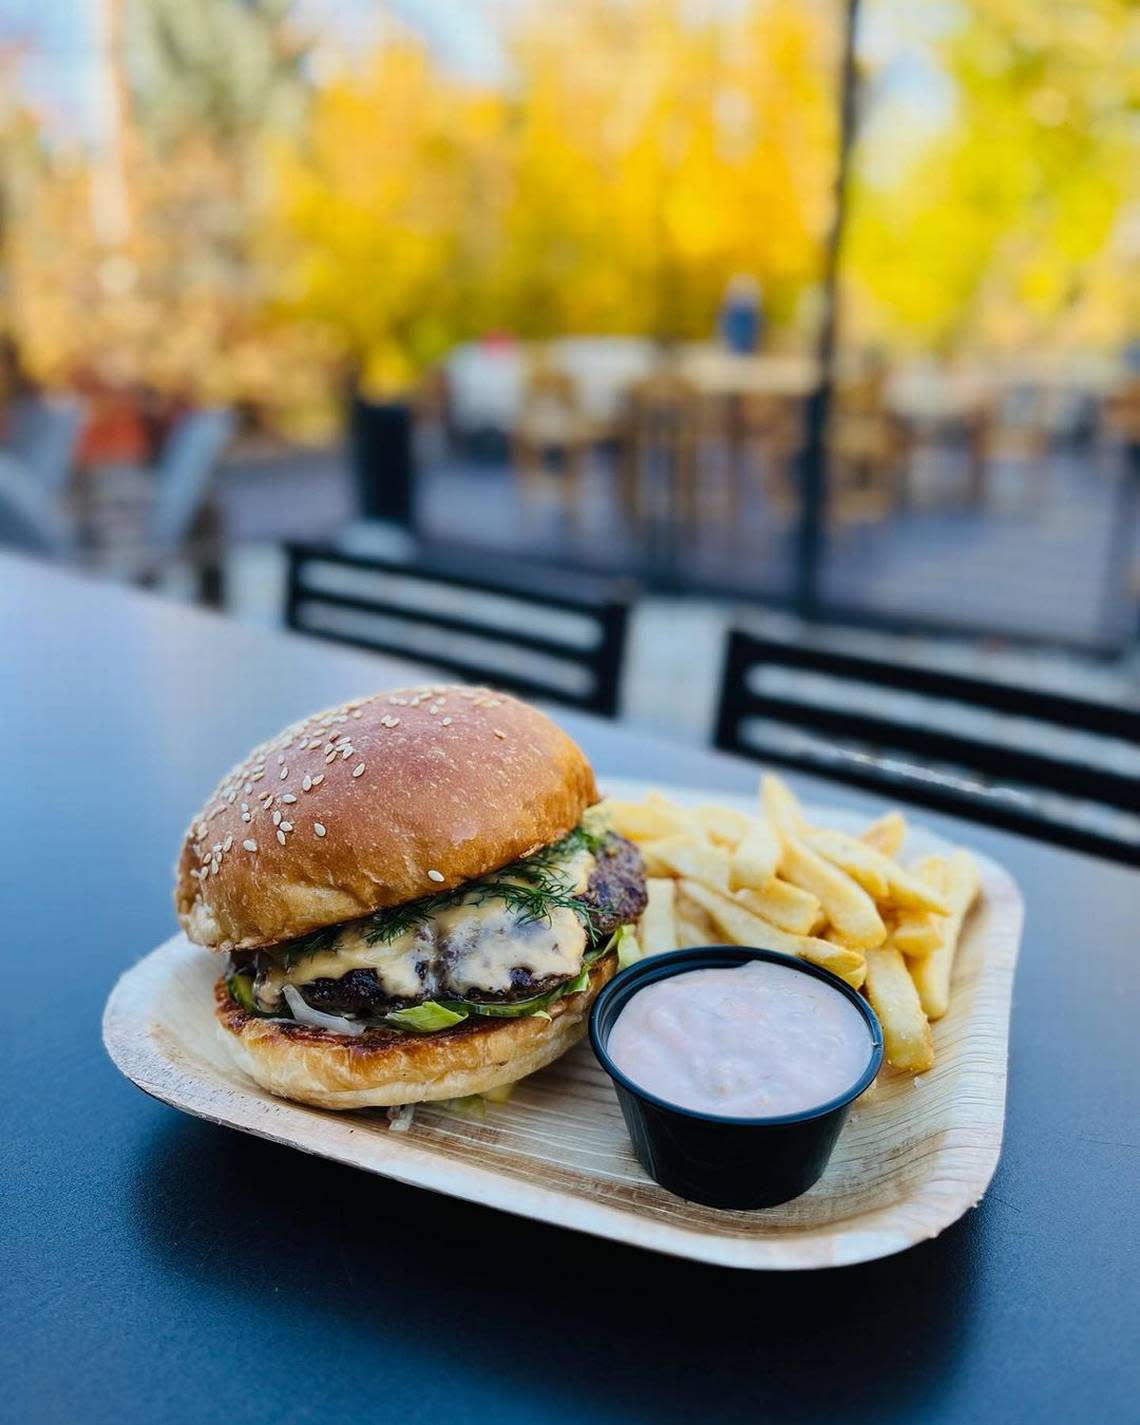 Telaya Wine Co. has referred to Terroir’s dill burger as a “cult fave” on social media.